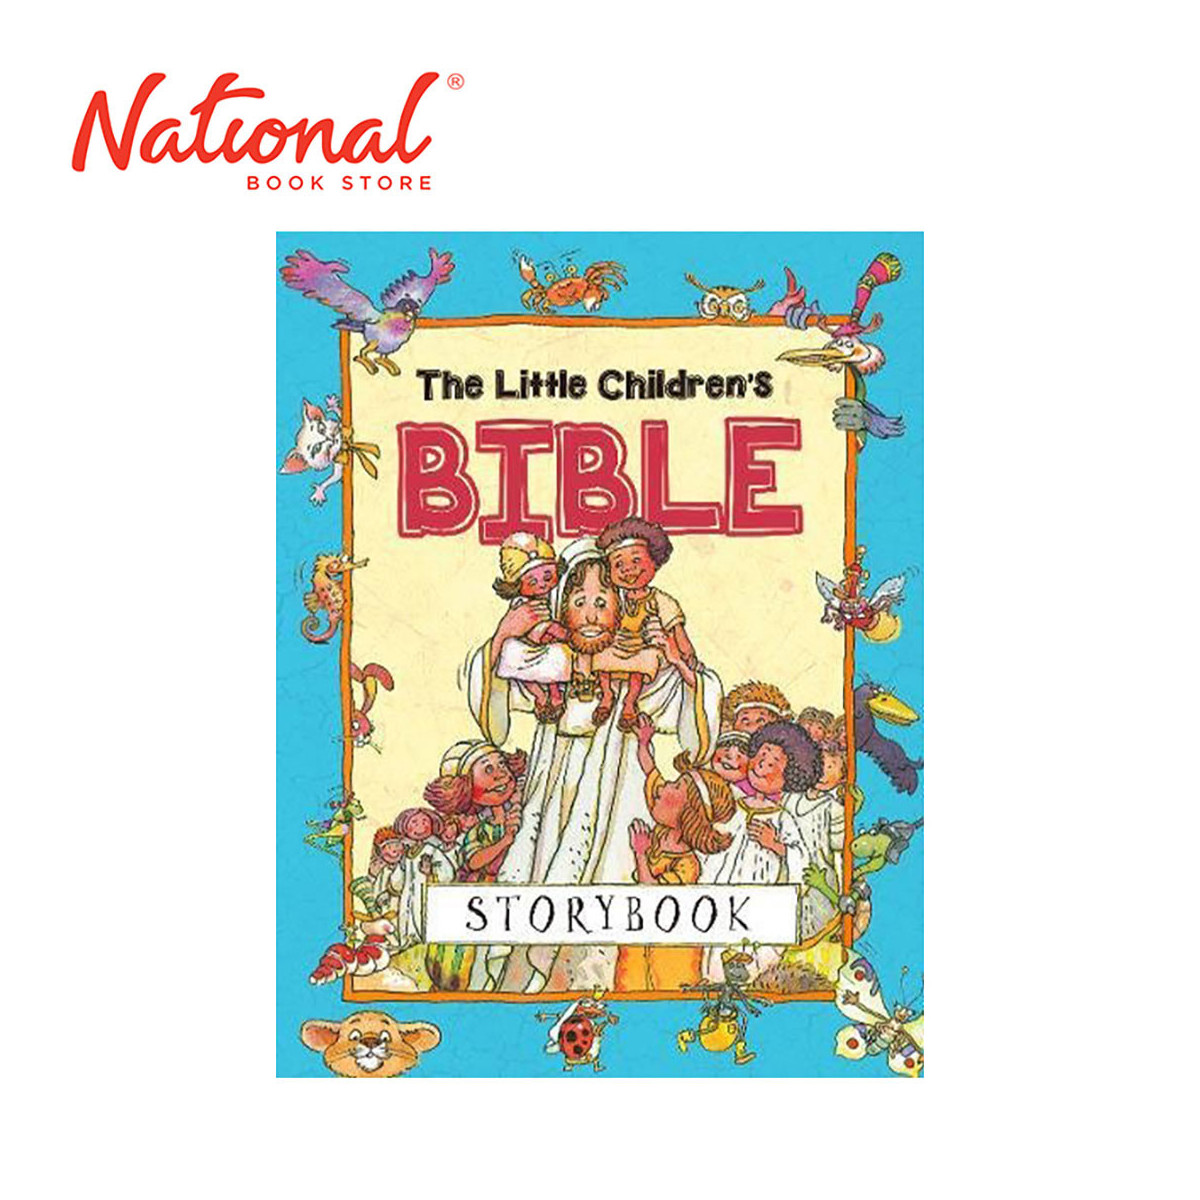 The Little Children's Bible Storybook By Anne De Graaf - Hardcover - Books for Kids